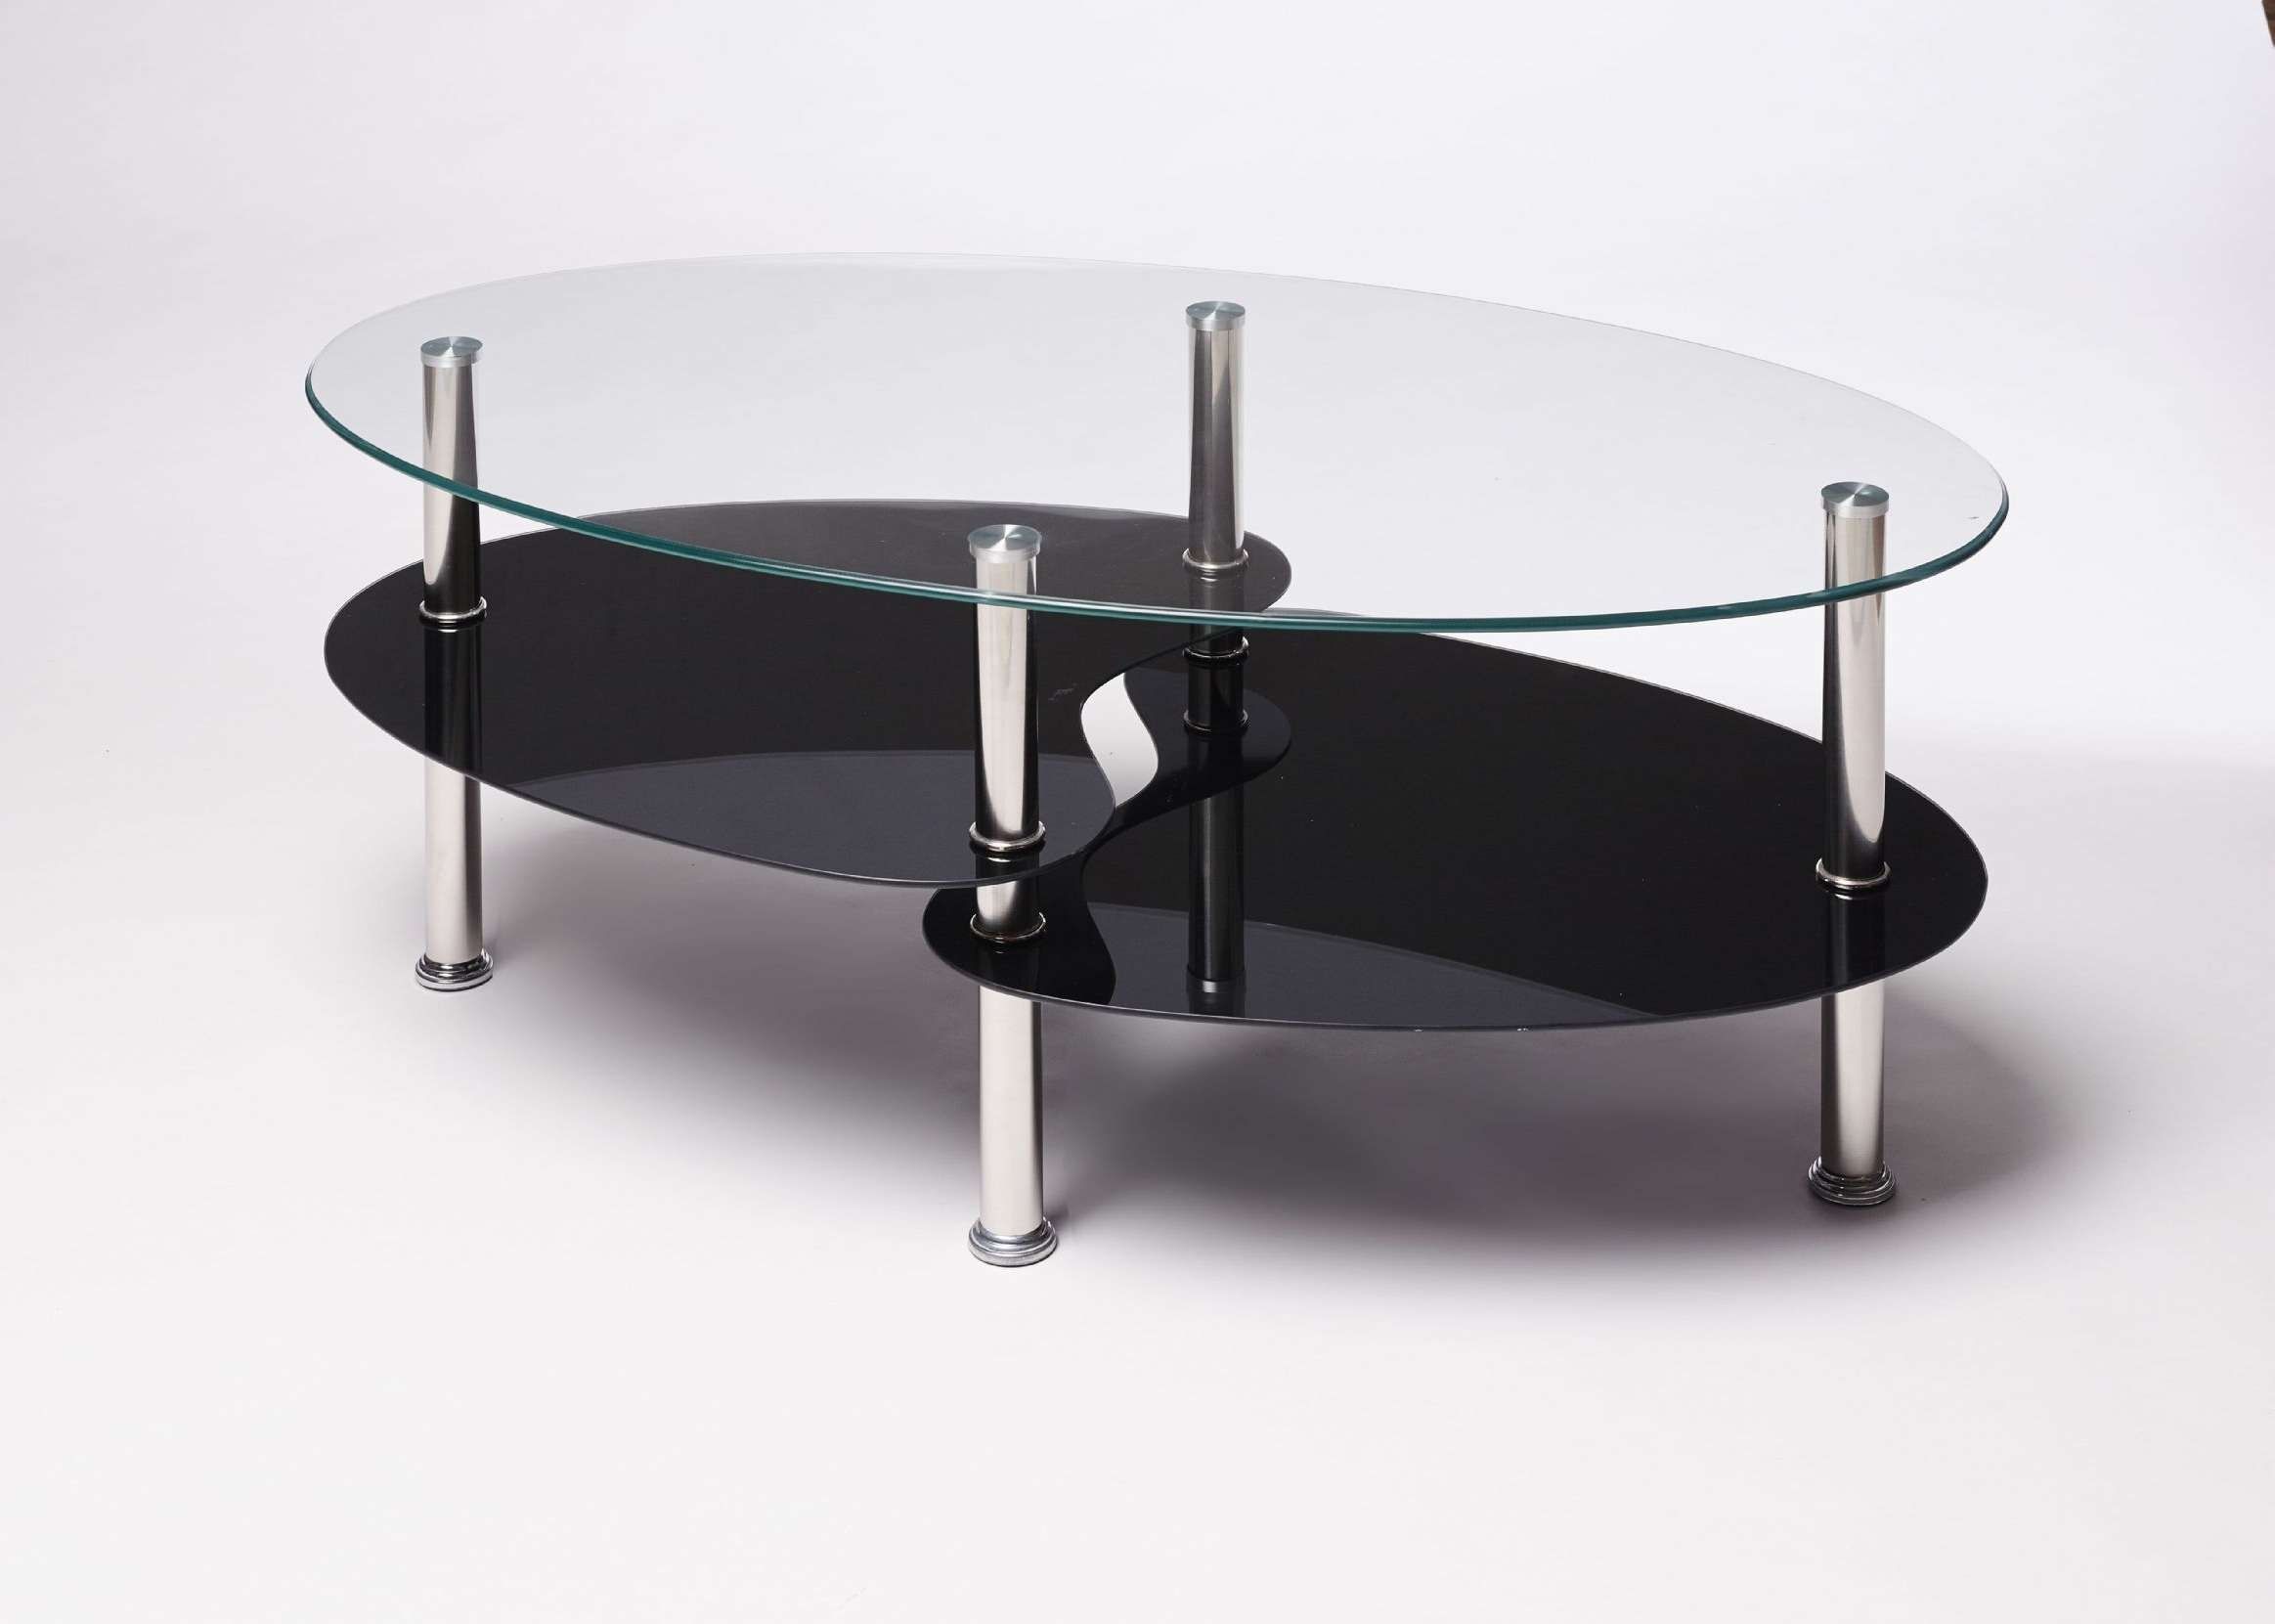 Oval Glass Coffee Table Set In Rummy Black Pyramid Design Oval Regarding Fashionable Oval Black Glass Coffee Tables (View 1 of 20)